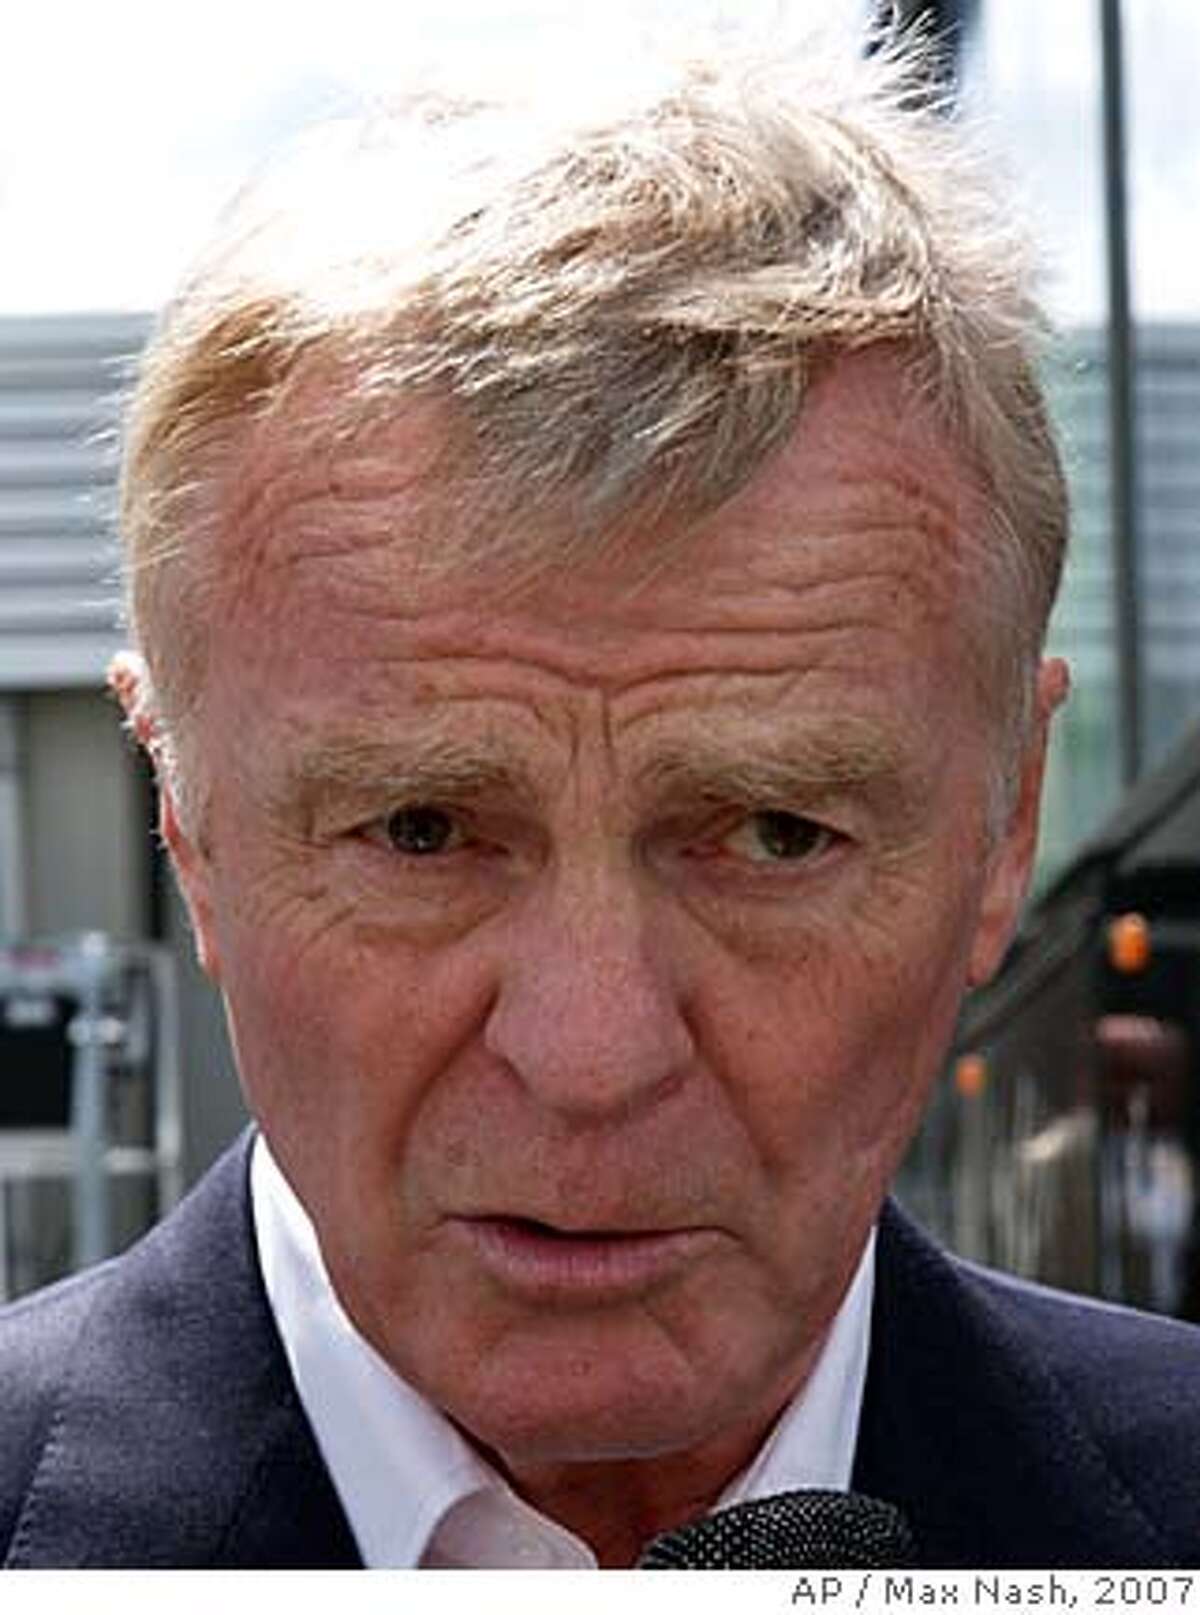 ** FILE ** Max Mosley, president of the FIA, motor sport's governing body, answers reporters questions regarding the issue between McLaren and Ferrari, at the paddock at Silverstone, England, in this July 7, 2007 file photo. FIA wants to stay clear of the situation involving its president, Max Mosley, and a British tabloid that reported he engaged in sexual acts with five prostitutes in a scenario that involved Nazi role-playing. "This is a matter between Mr. Mosley and the newspaper," the governing body of world auto racing said Sunday, March 30, 2008. Mosley, the son of British Union of Fascists party founder Oswald Mosley, reportedly took part in the scene on Friday at a London apartment near his home, according to the News of the World in a front-page story. (AP Photo/Max Nash)